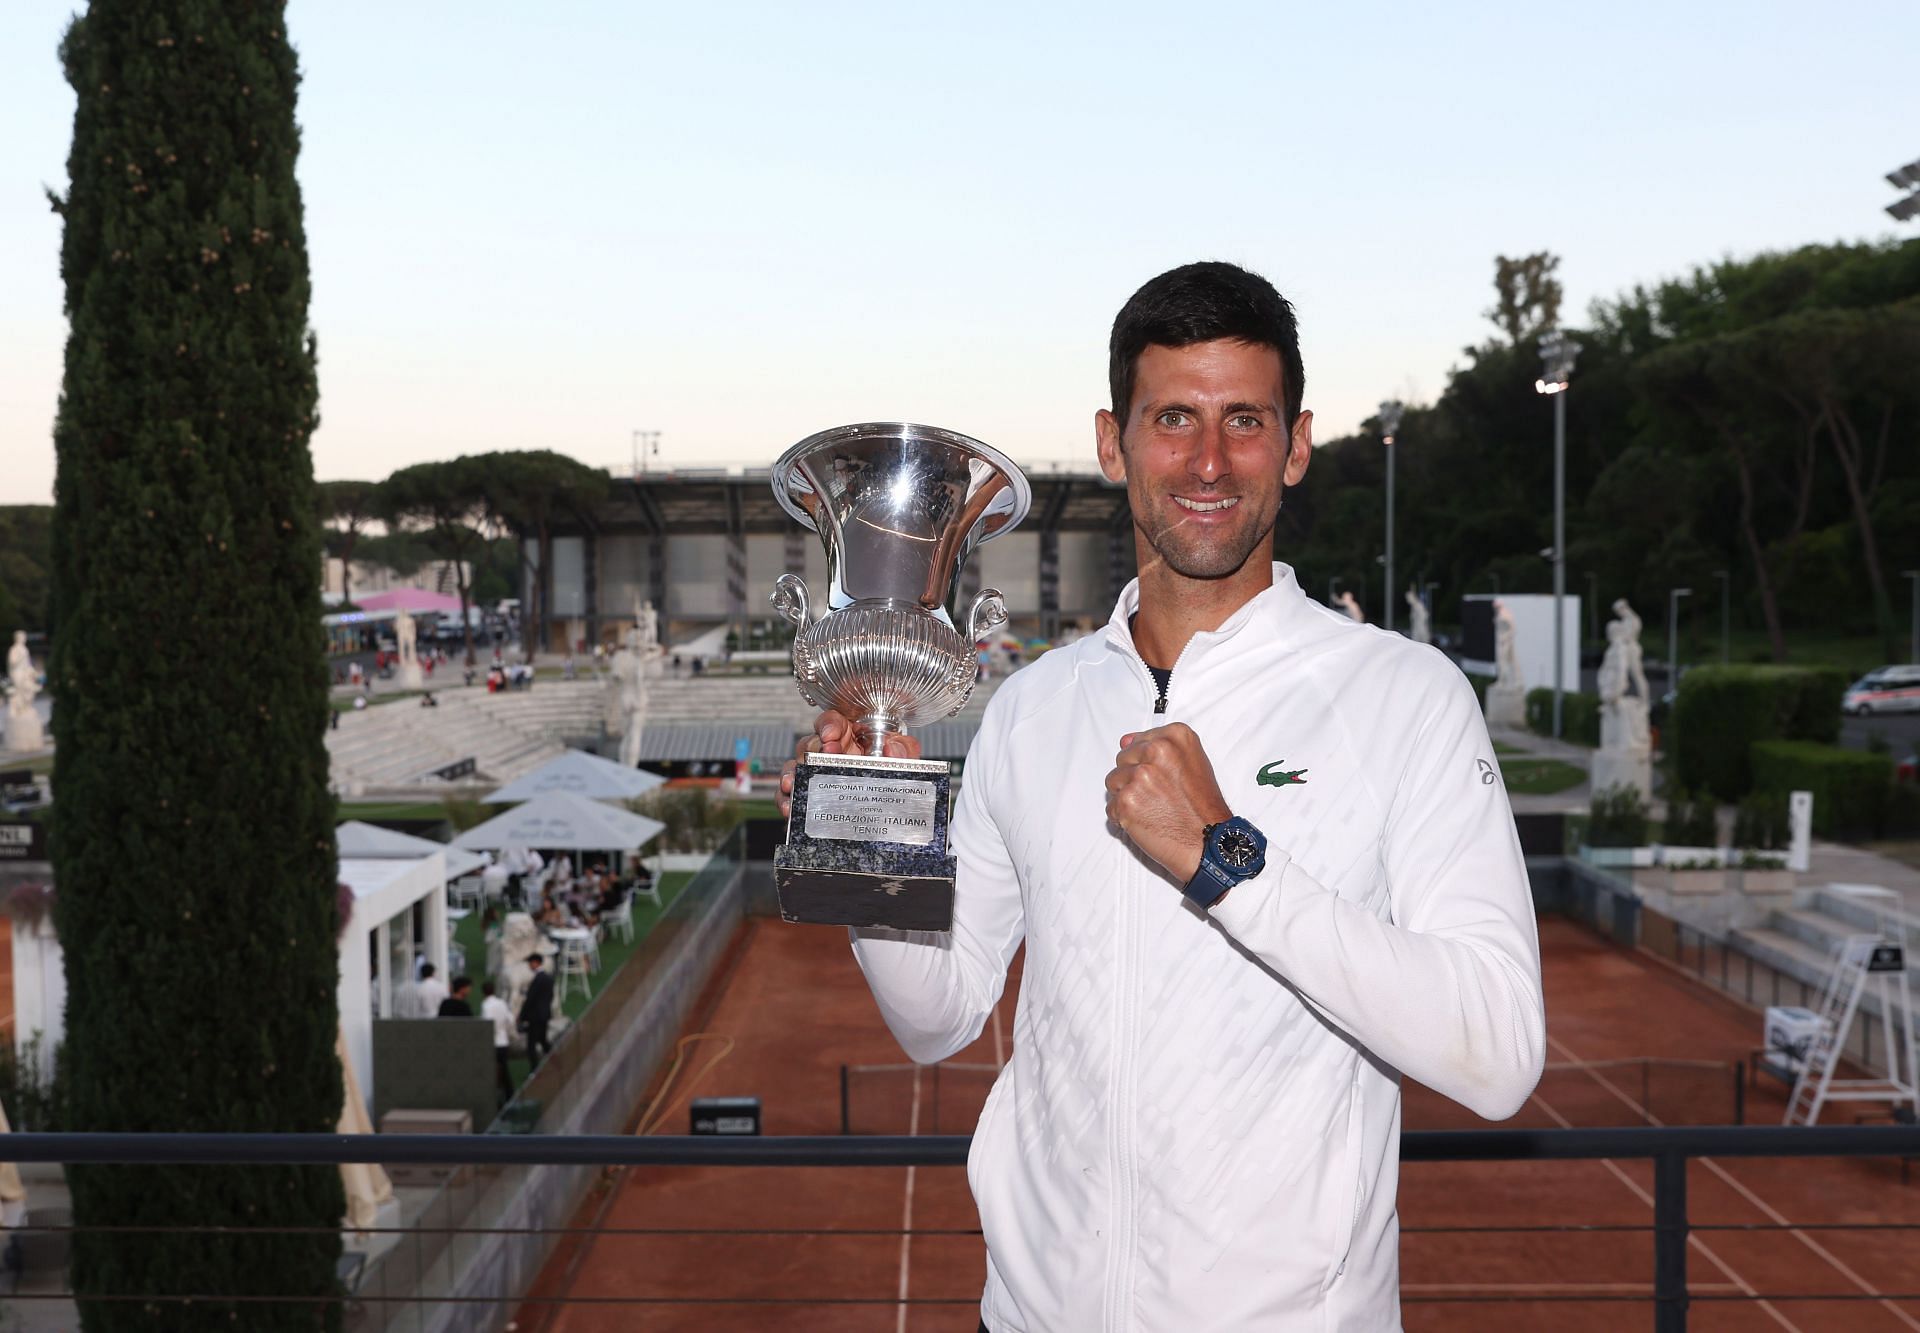 Novak Djokovic hopes his son can enjoy his passion for the game without the pressure of expectations